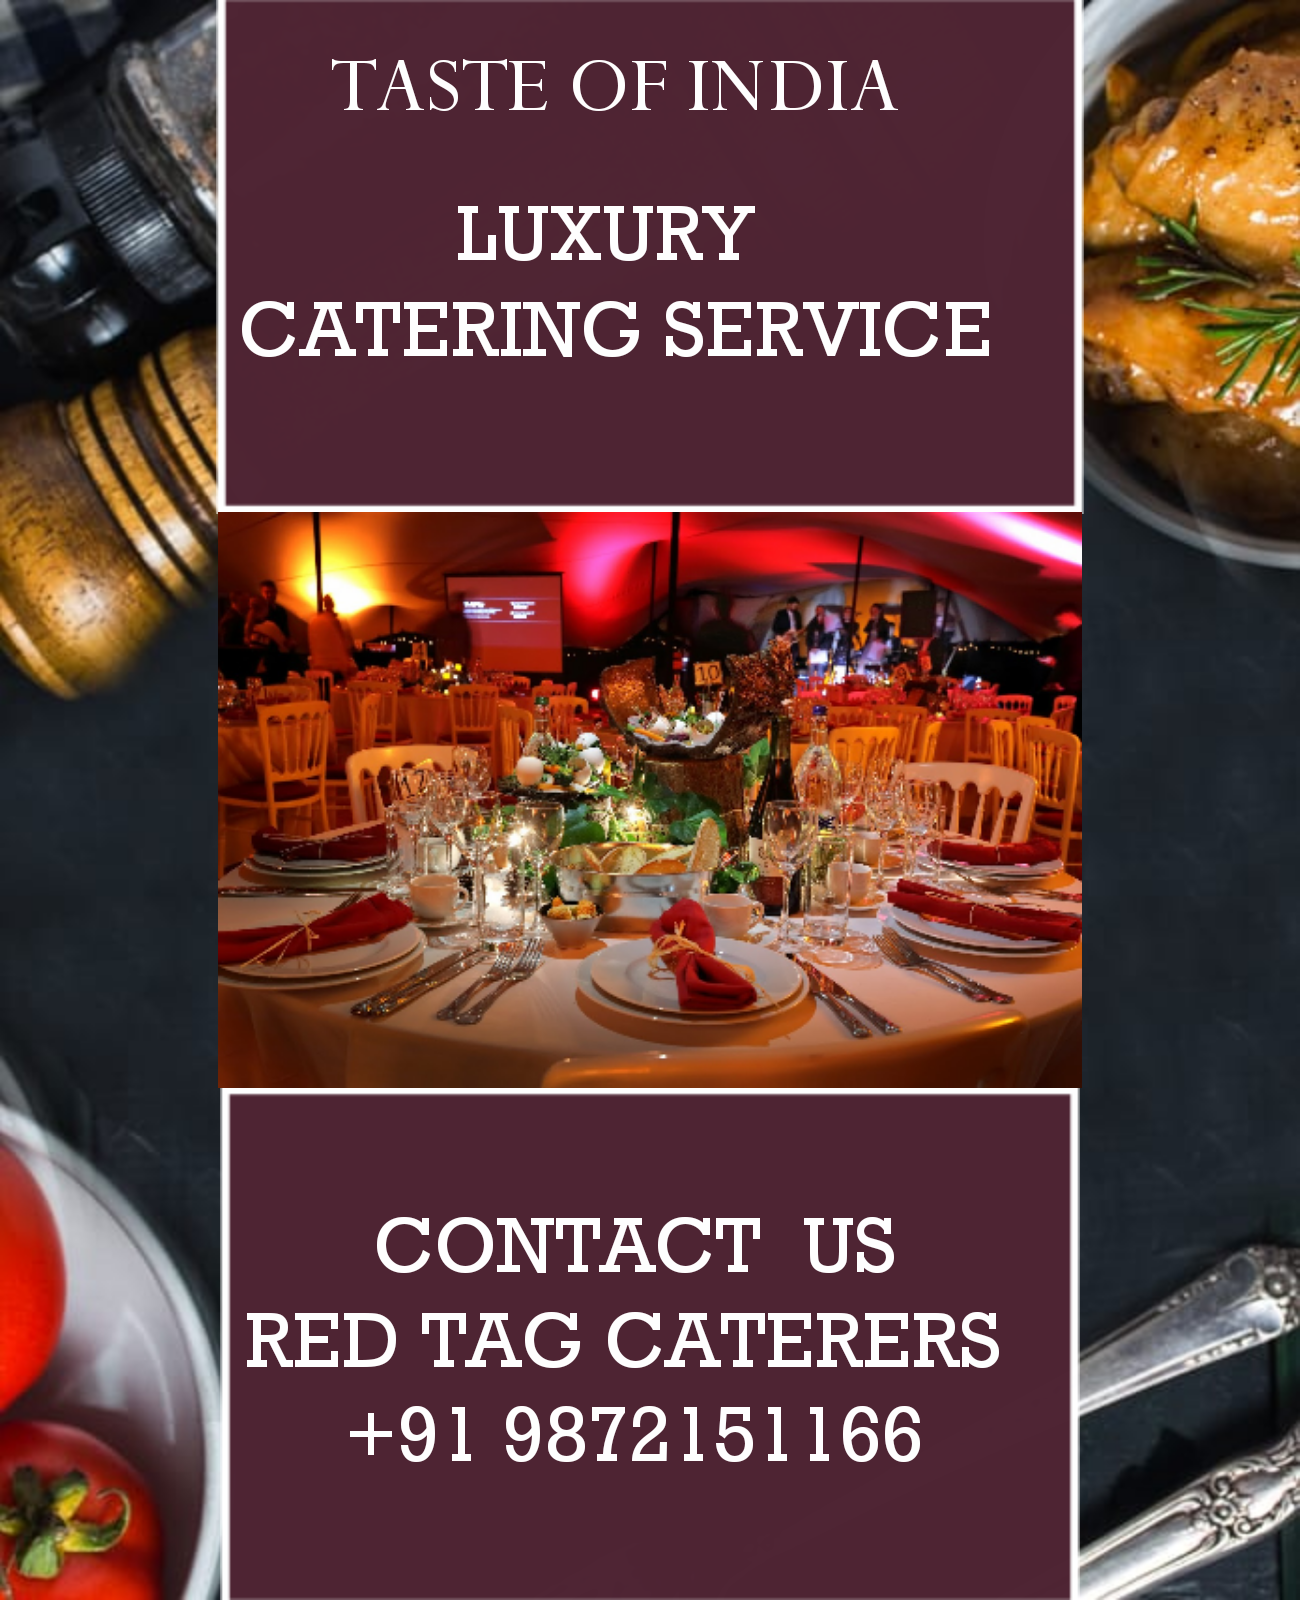  Red Tag catering  in Chandigarh now  | Red Tag Caterers | Red tag catering in Chandigarh now, professional catering service in Chandigarh, Unique catering service in Chandigarh, luxury catering service in Chandigarh, caterers,  - GL44665